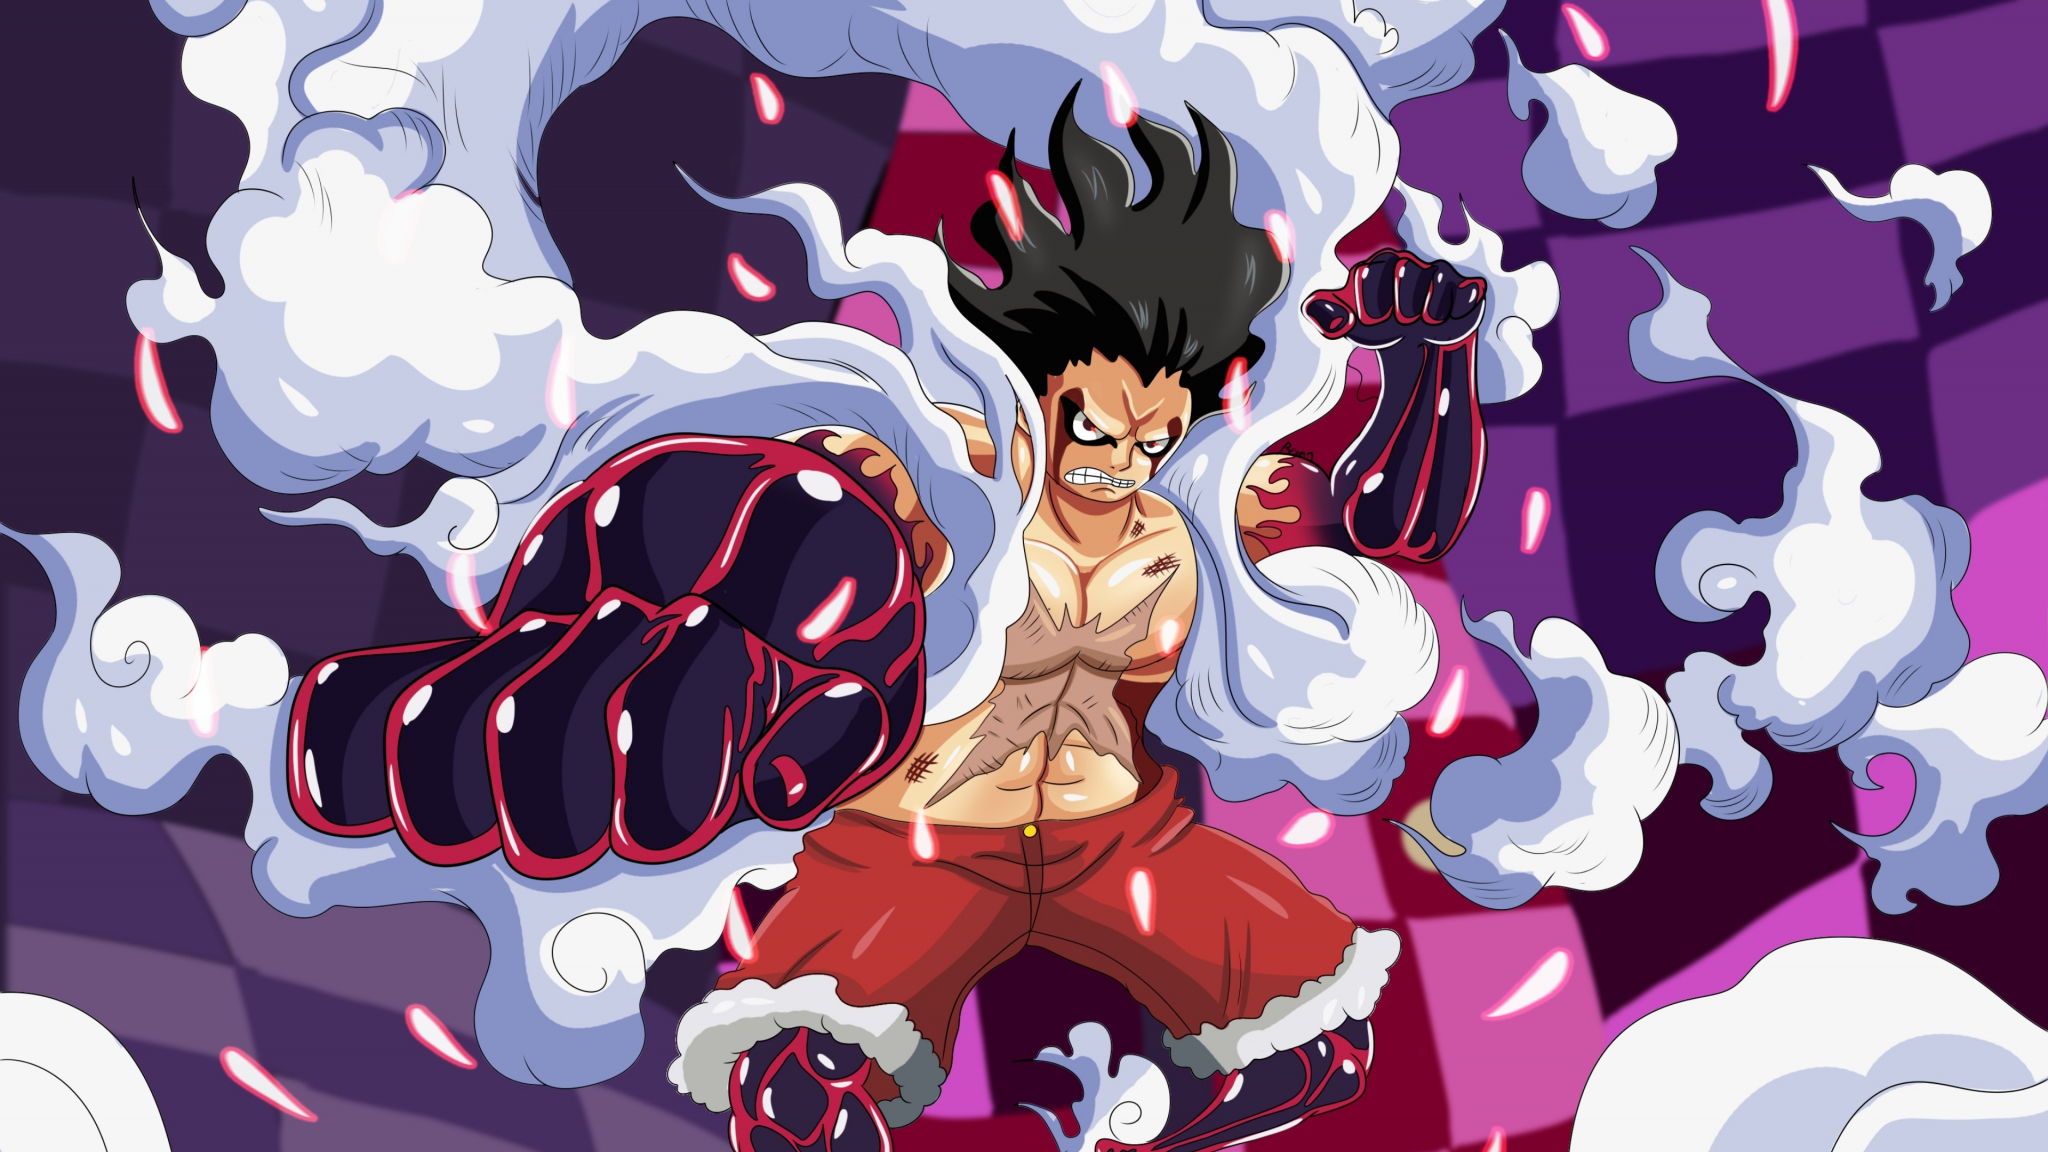 Download Artwork One Piece Monkey D Luffy 48x1152 Wallpaper Dual Wide 48x1152 Hd Image Background